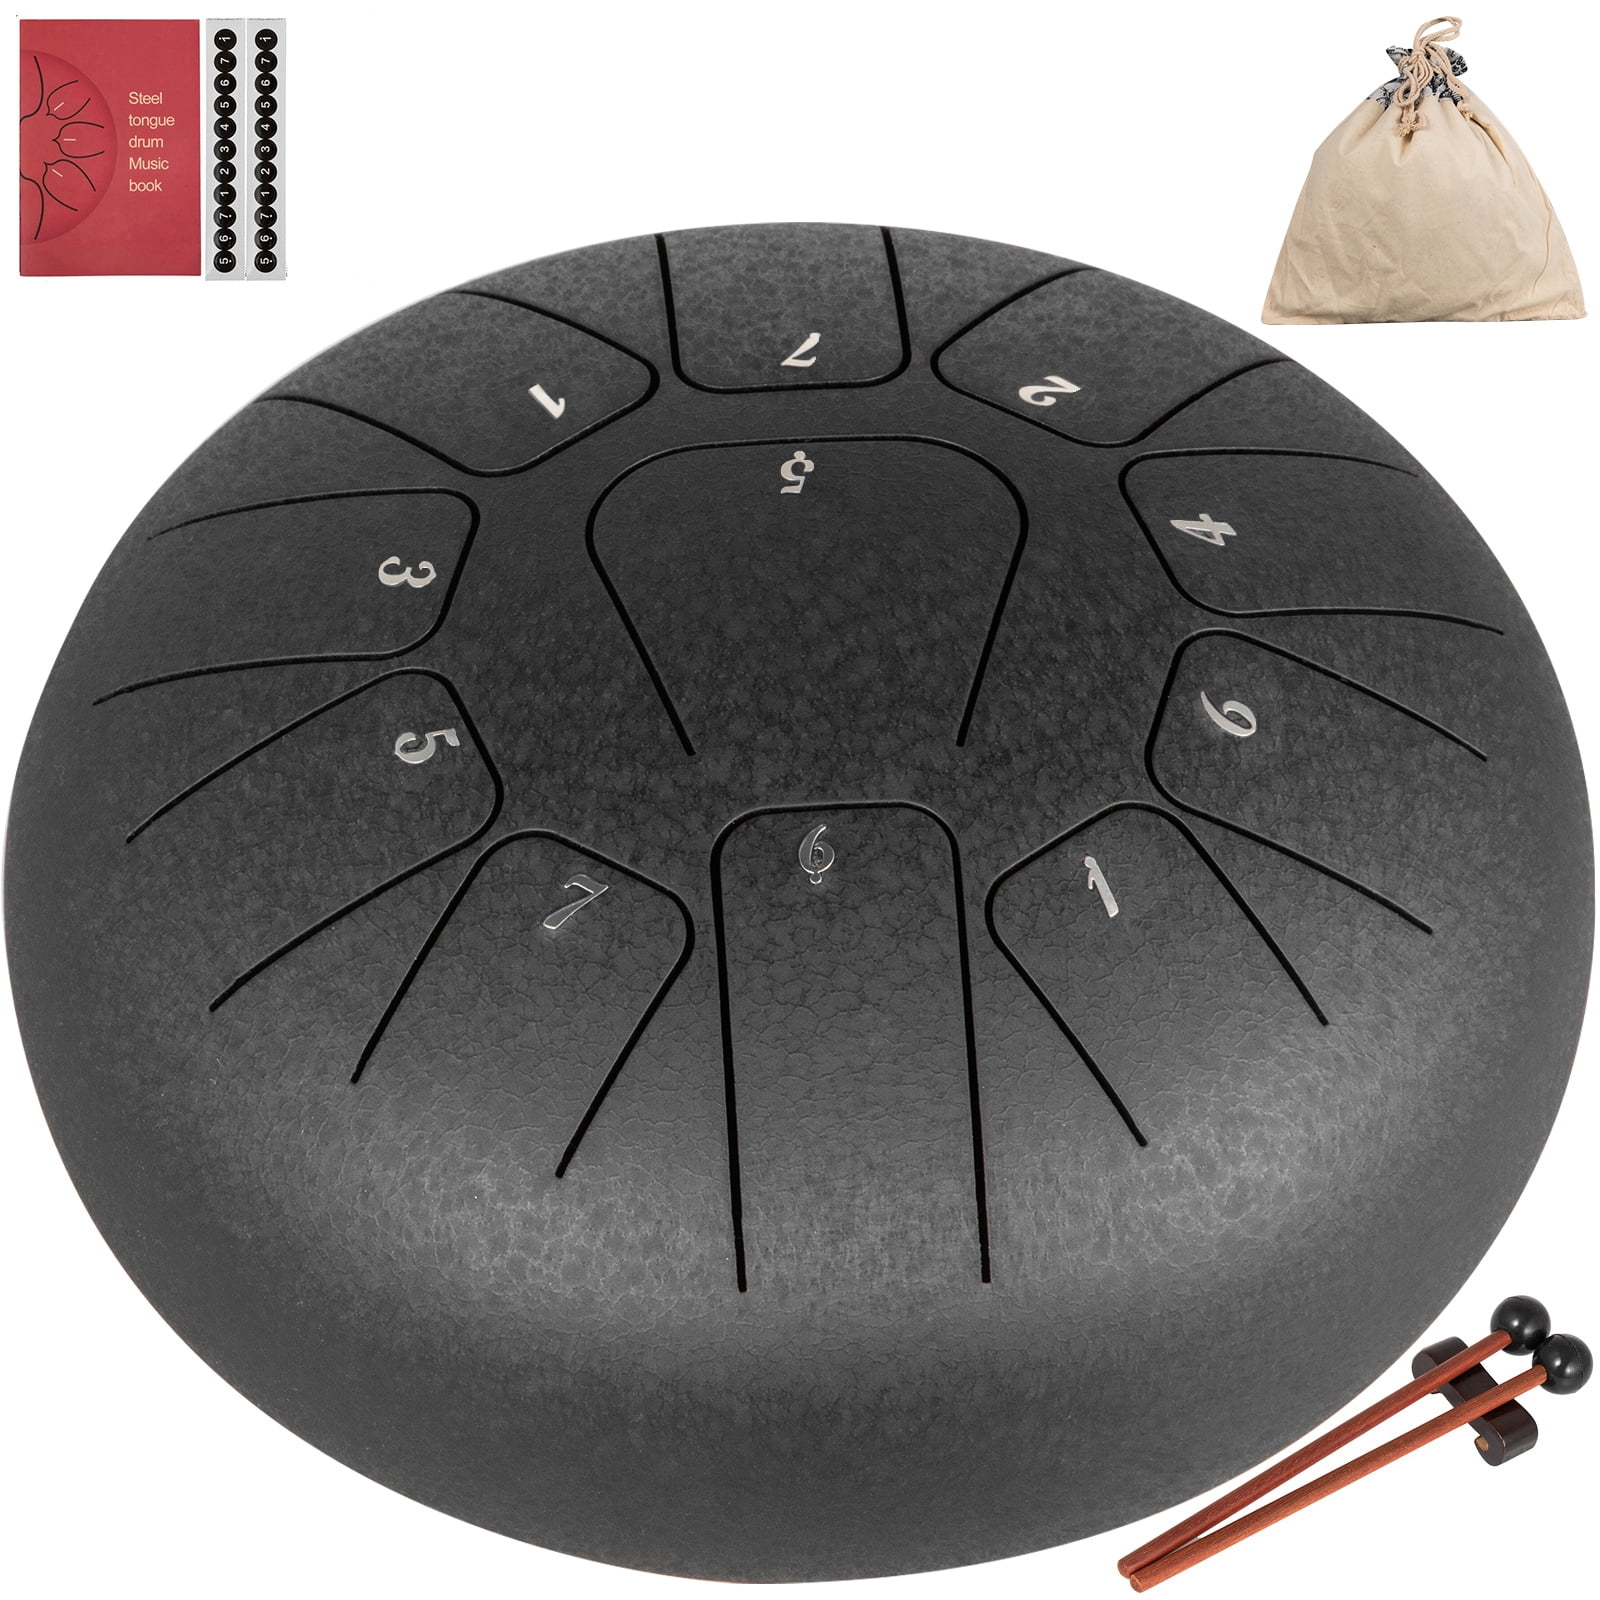 Hand Pan Mini 6 Inch 8 Notes Hand Pan Drum with Mallets Steel Tongue Drum Professional G Tune Tank Music Education Carry Instrument